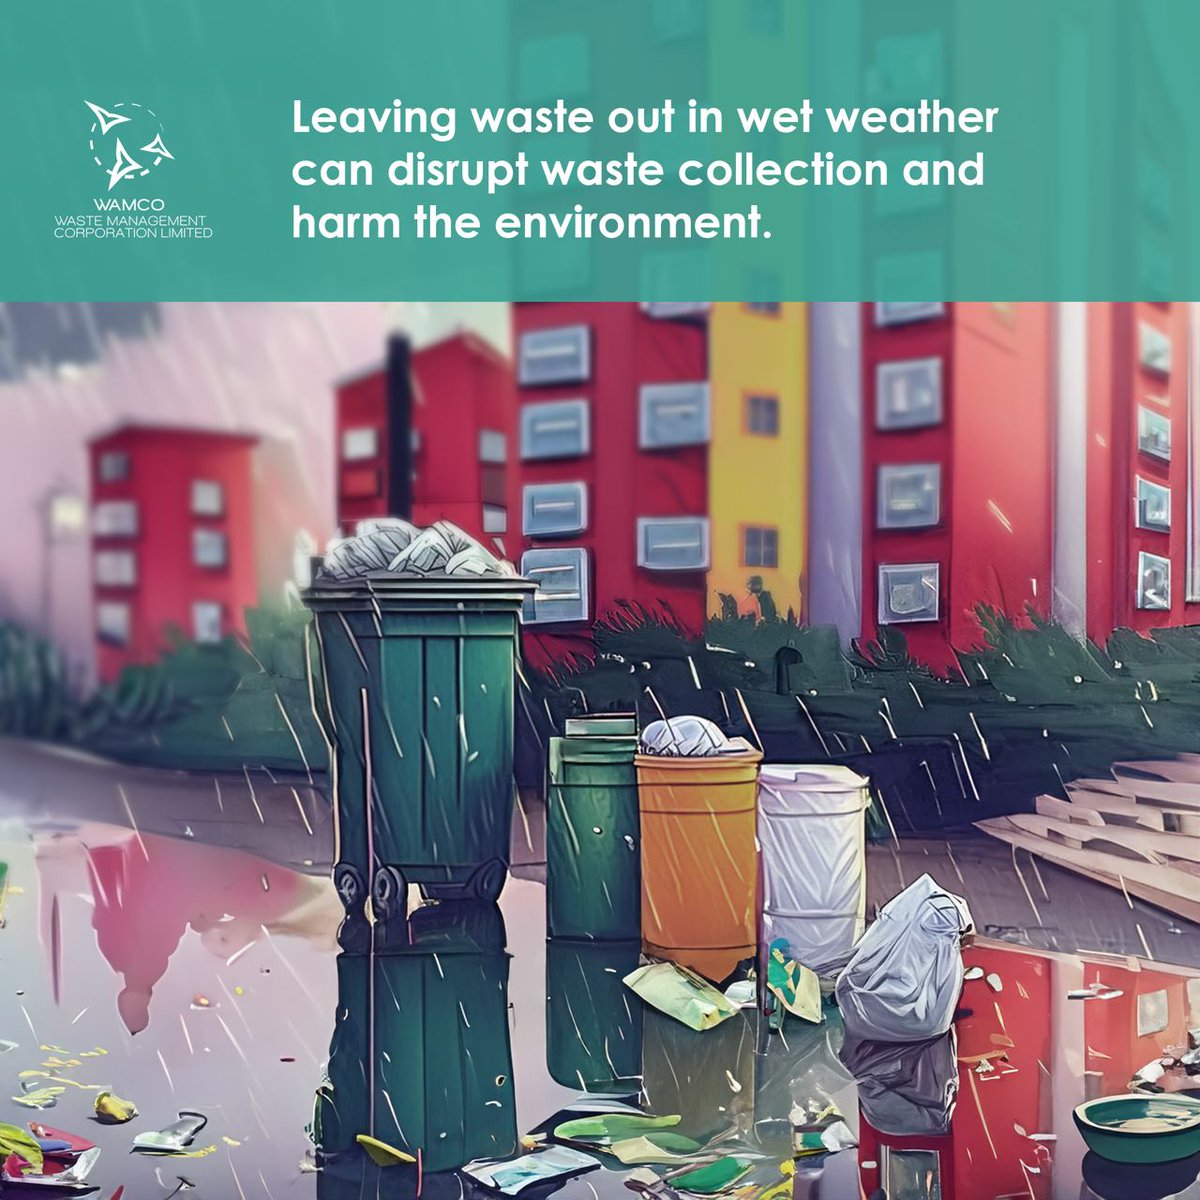 Proper waste disposal is vital during rain to prevent pollution & road hazards. Secure your waste & dispose of trash responsibly. #WAMCO #Thimaageveshi_Saafuveshi